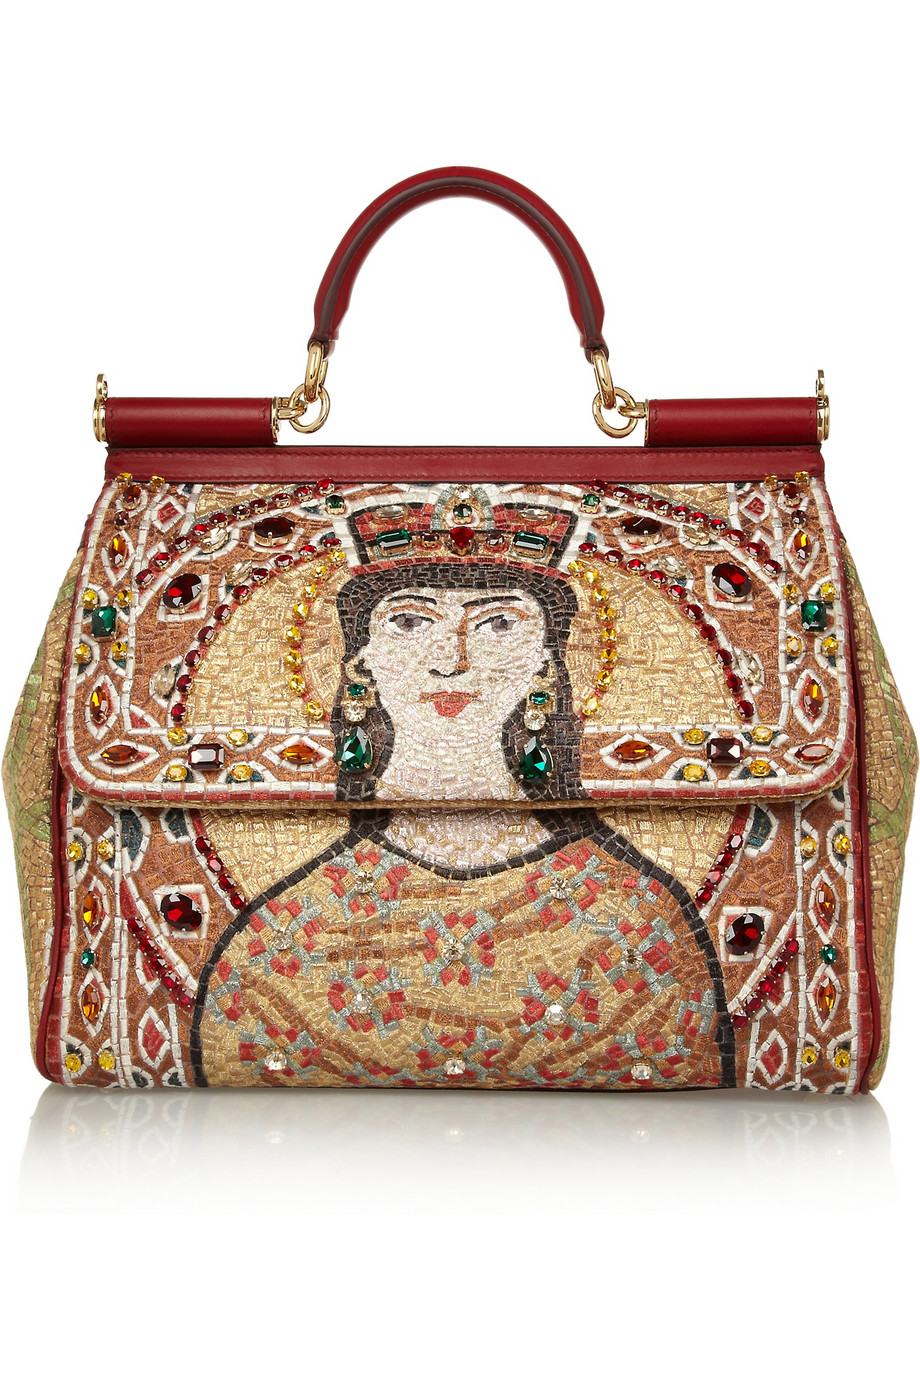 Lyst - Dolce & Gabbana The Sicily Large Embroidered Tote in Metallic